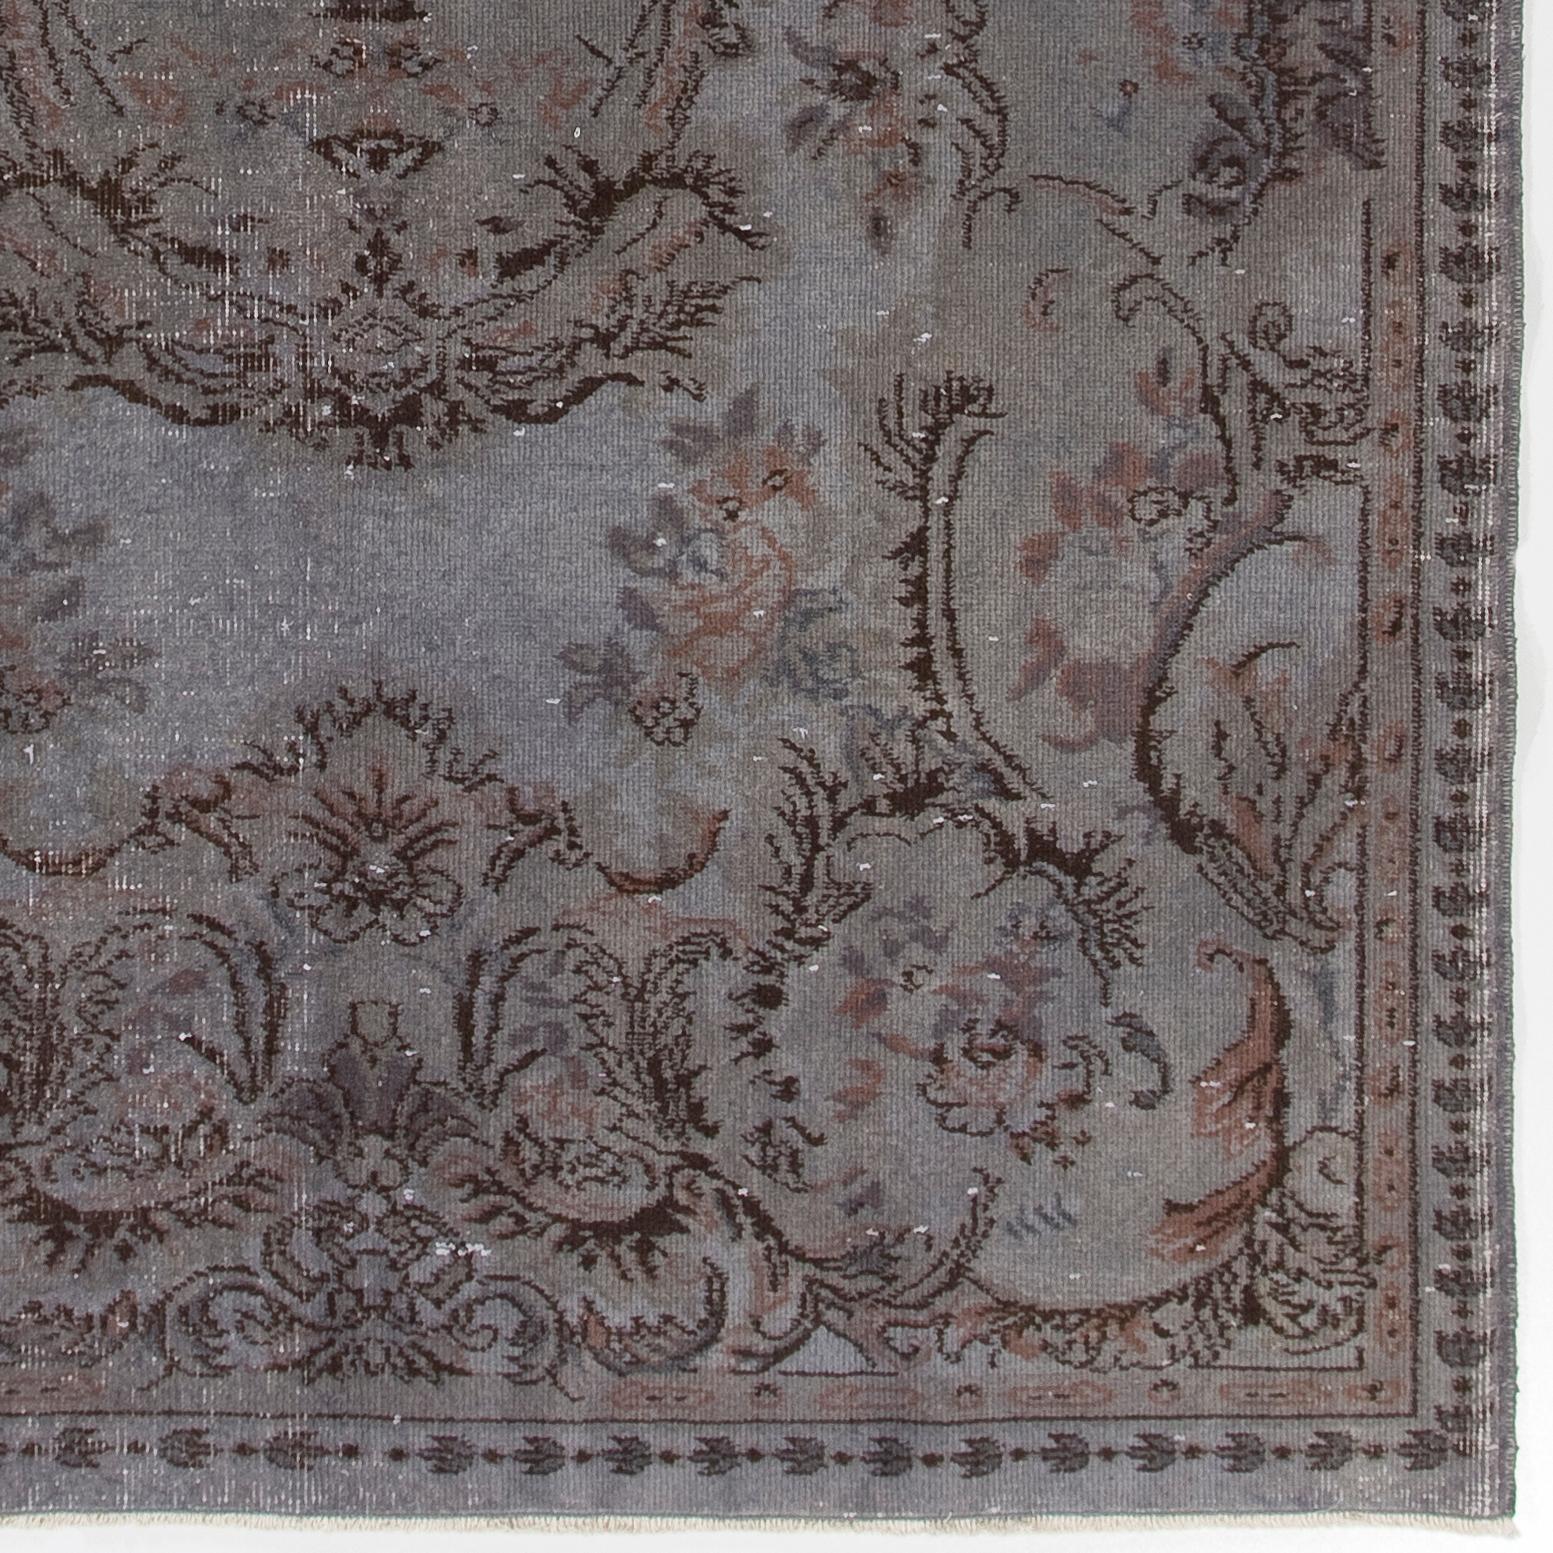 5.4x8.5 Ft French-Aubusson Inspired Turkish Rug, Gray Modern Handmade Carpet In Good Condition For Sale In Philadelphia, PA